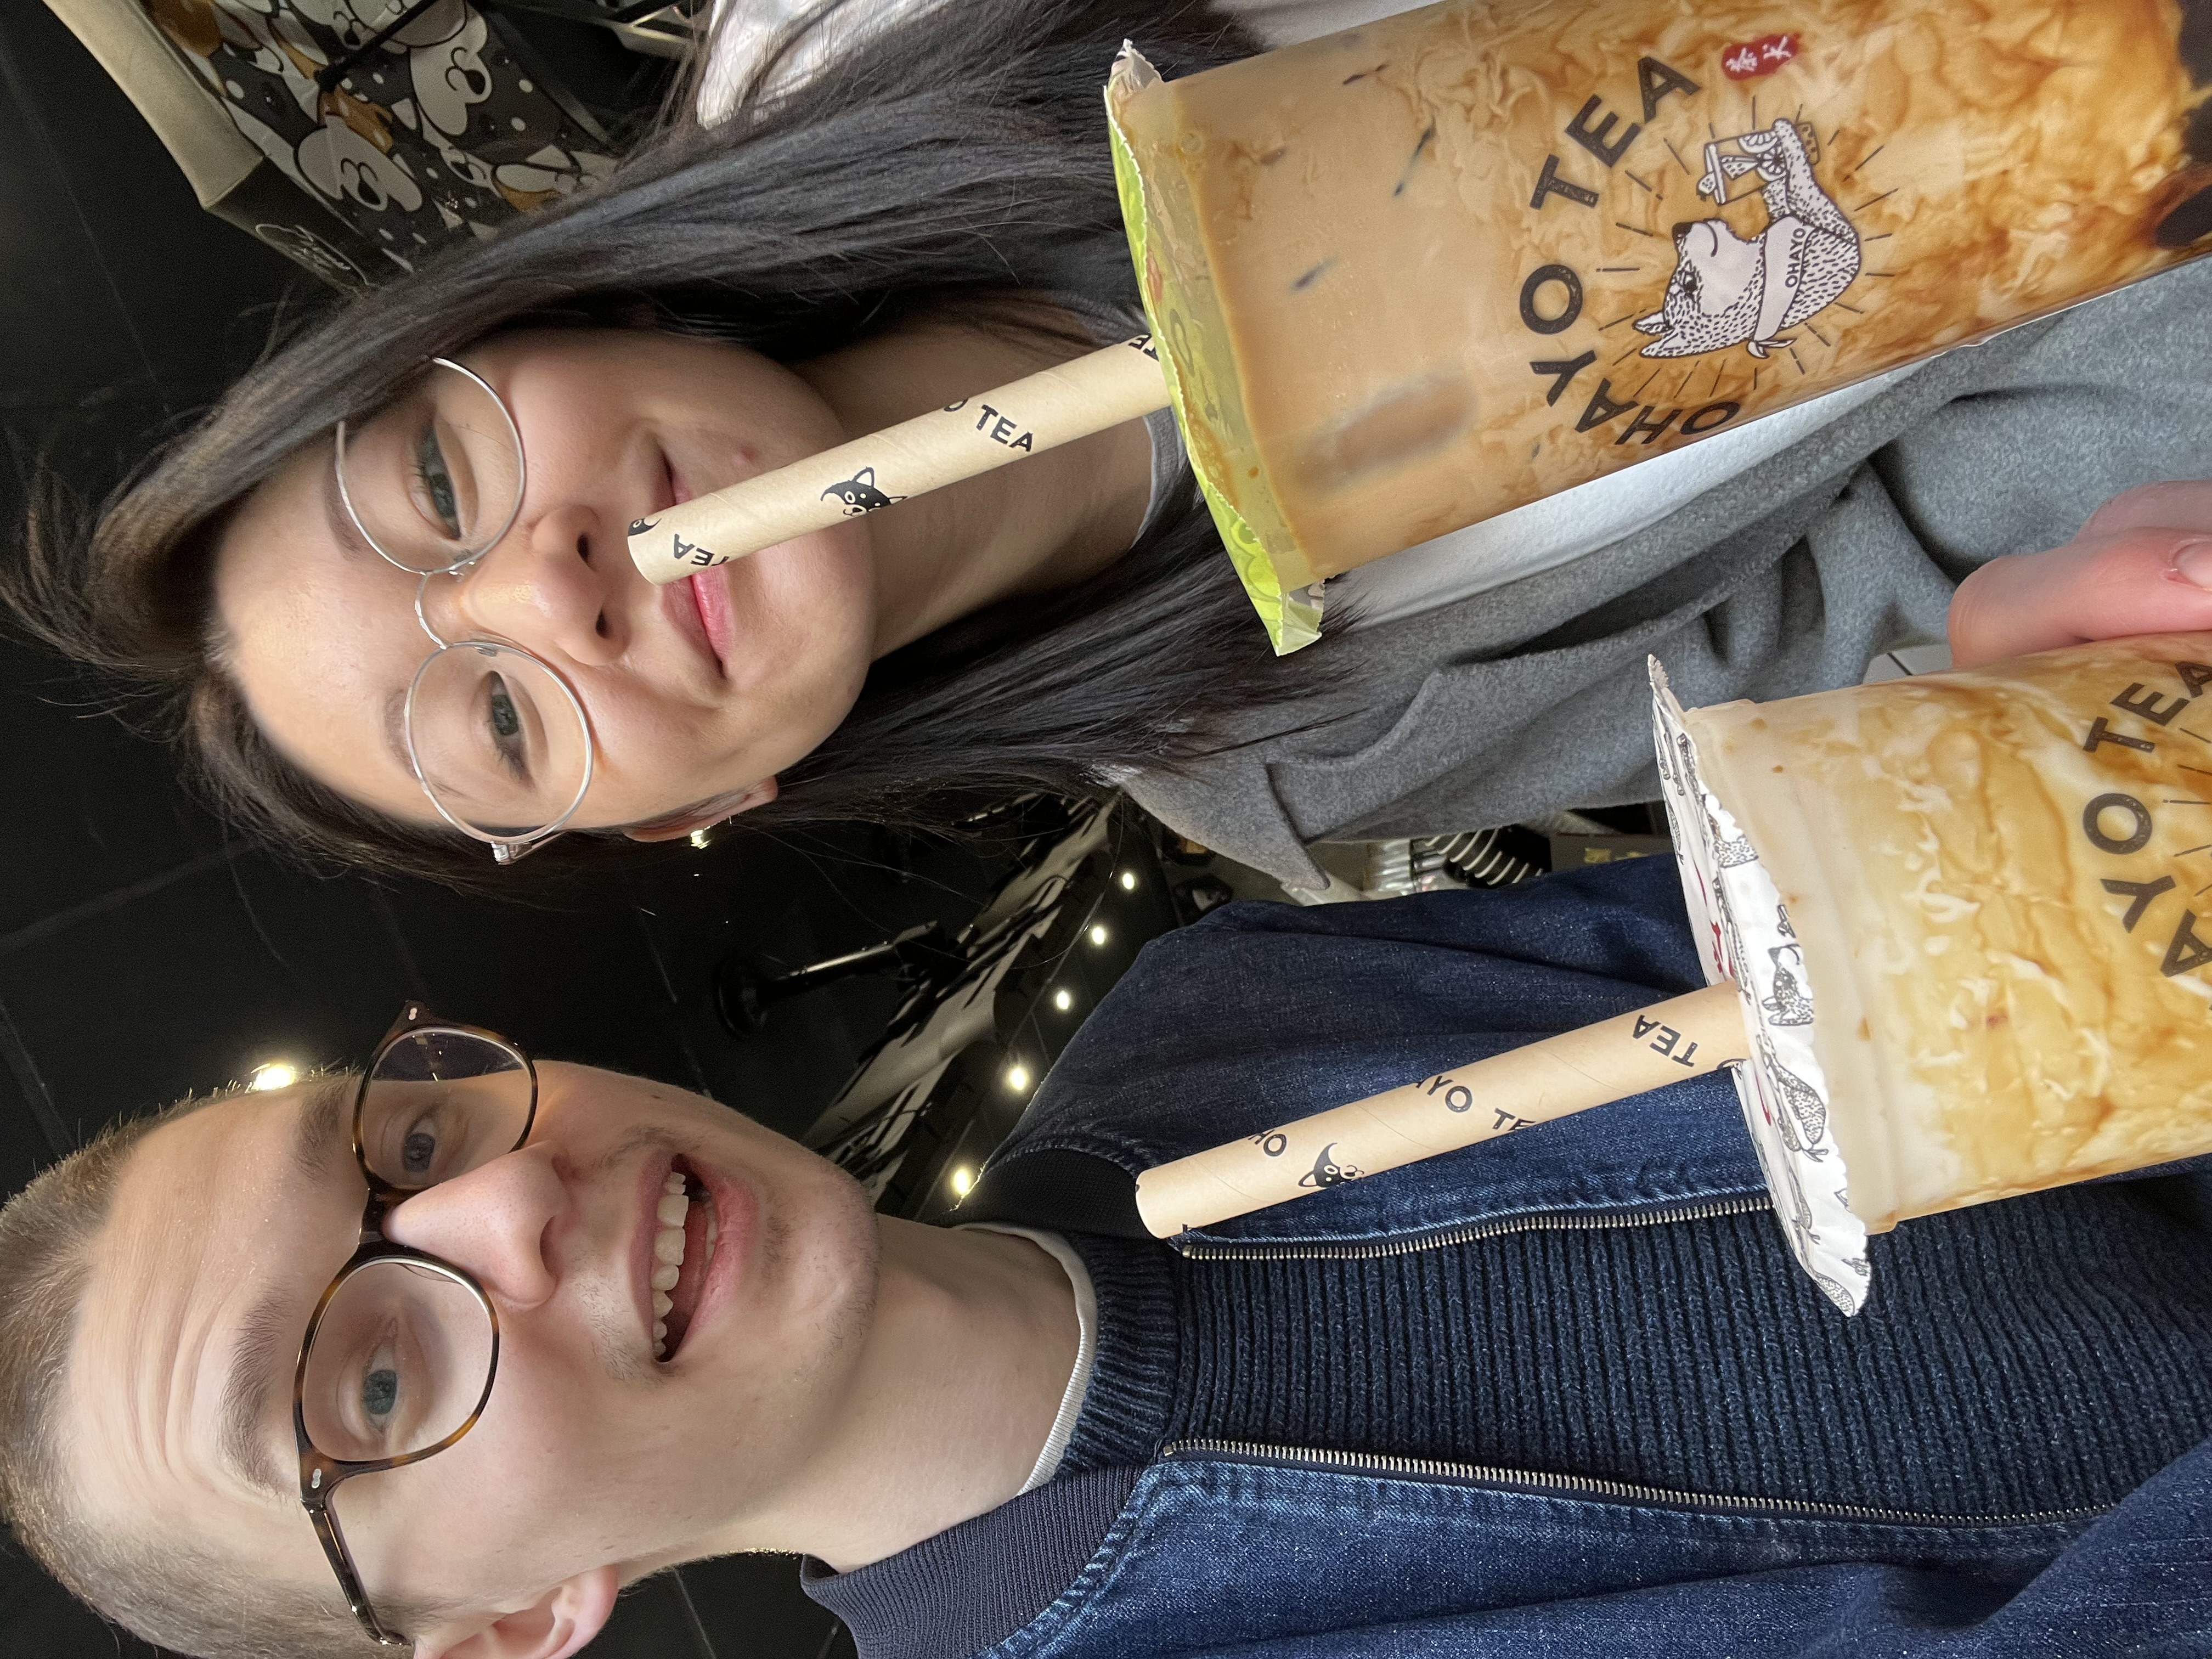 Charlie and Thila holding cups of bubble tea